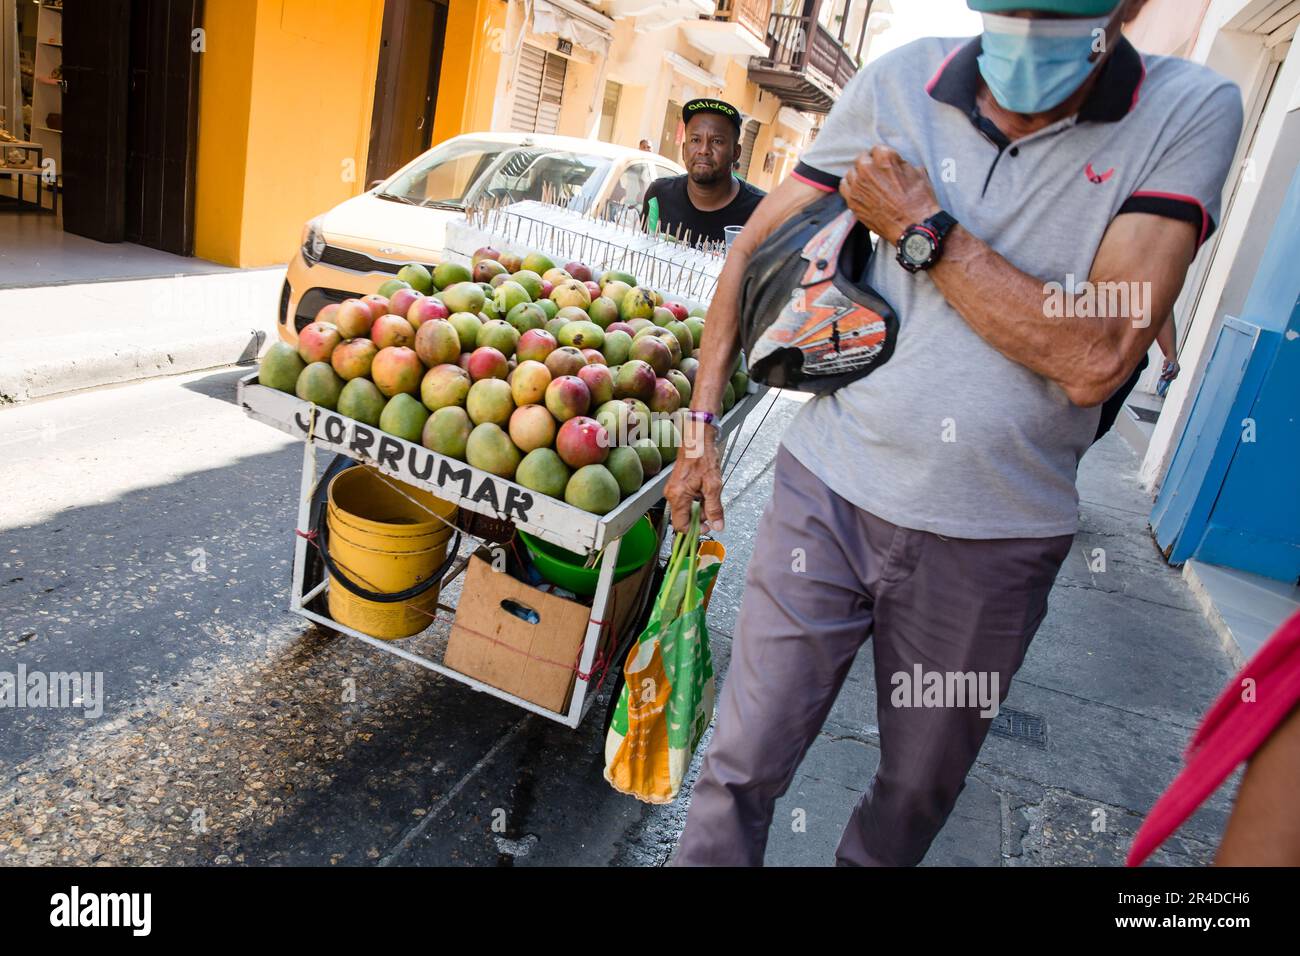 A man pushes a cart filled with papayas dow the street in Cartagena Colombia Stock Photo